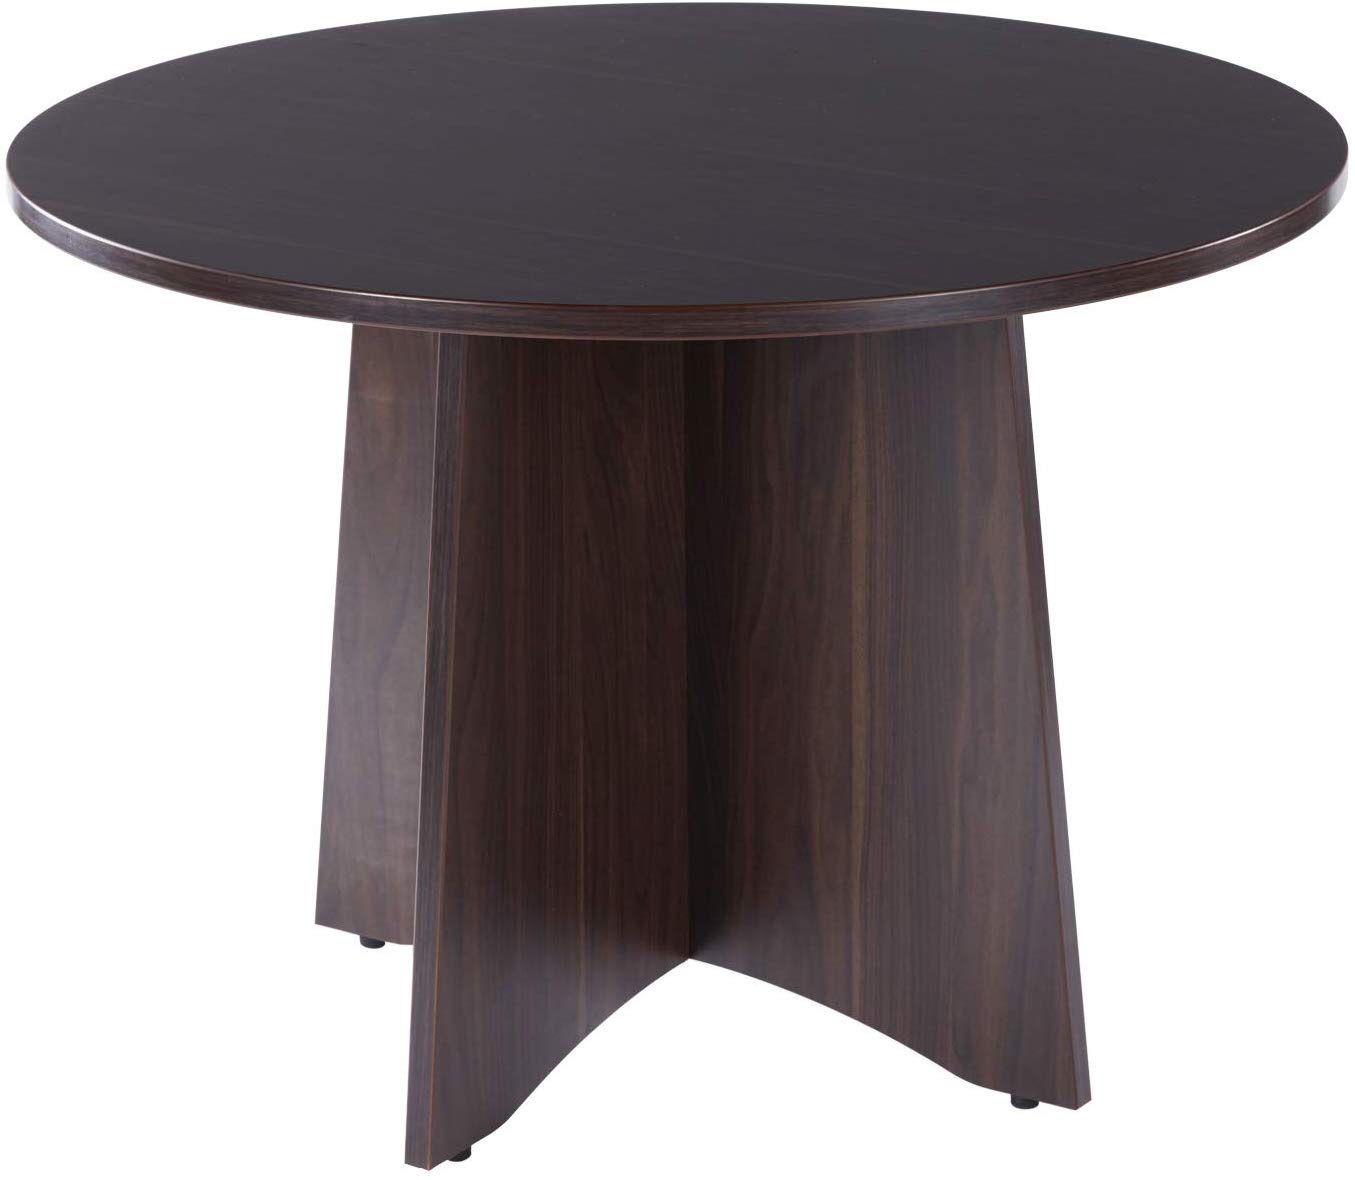 SUNON 42 INCH DIA ROUND CONFERENCE TABLE WITH X-SHAPED WOOD PANEL SMALL DINING TABLE (DARK WALNUT)